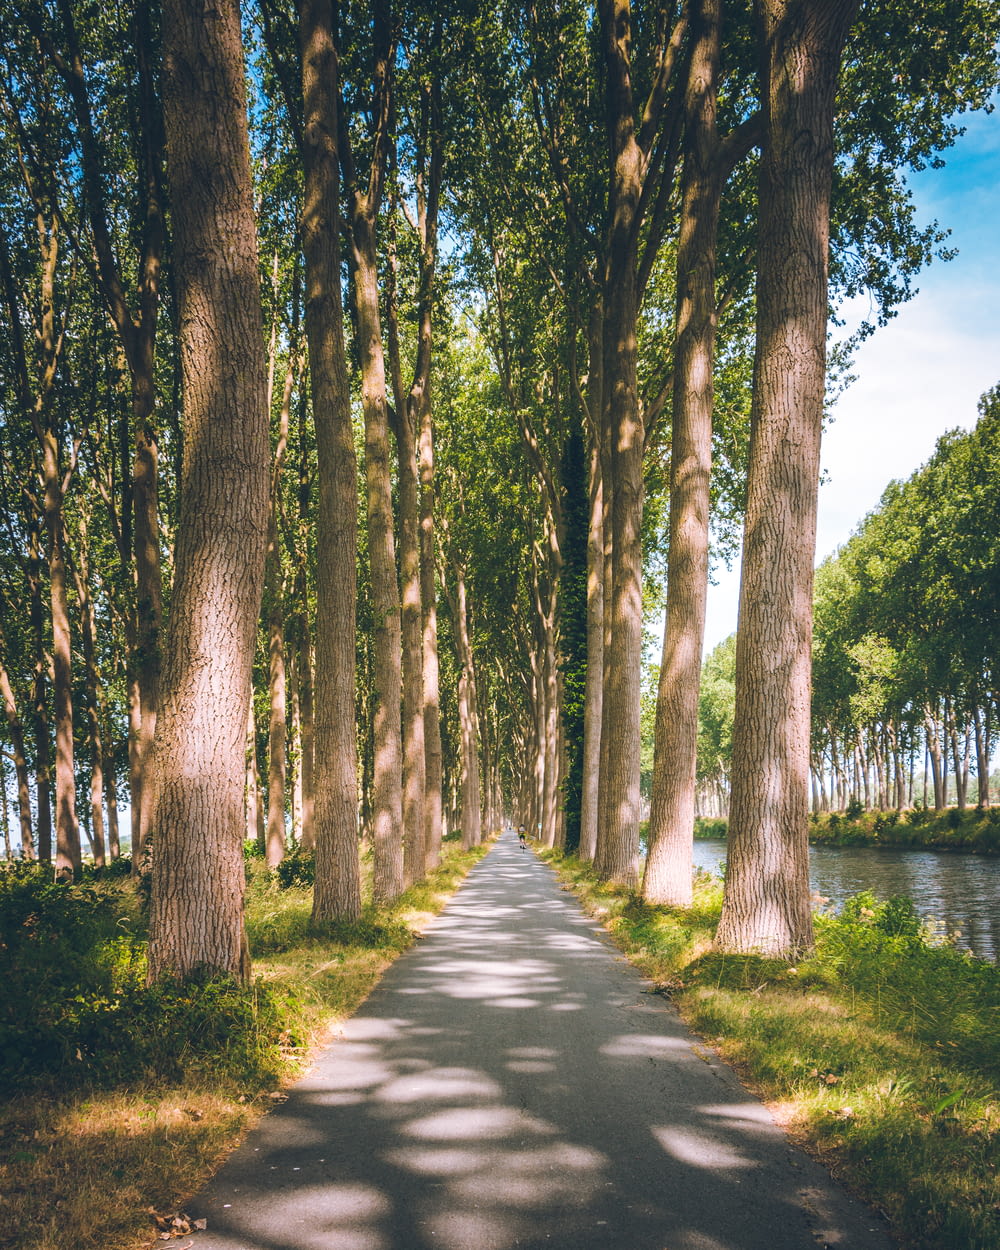 a tree lined road in a park next to a body of water